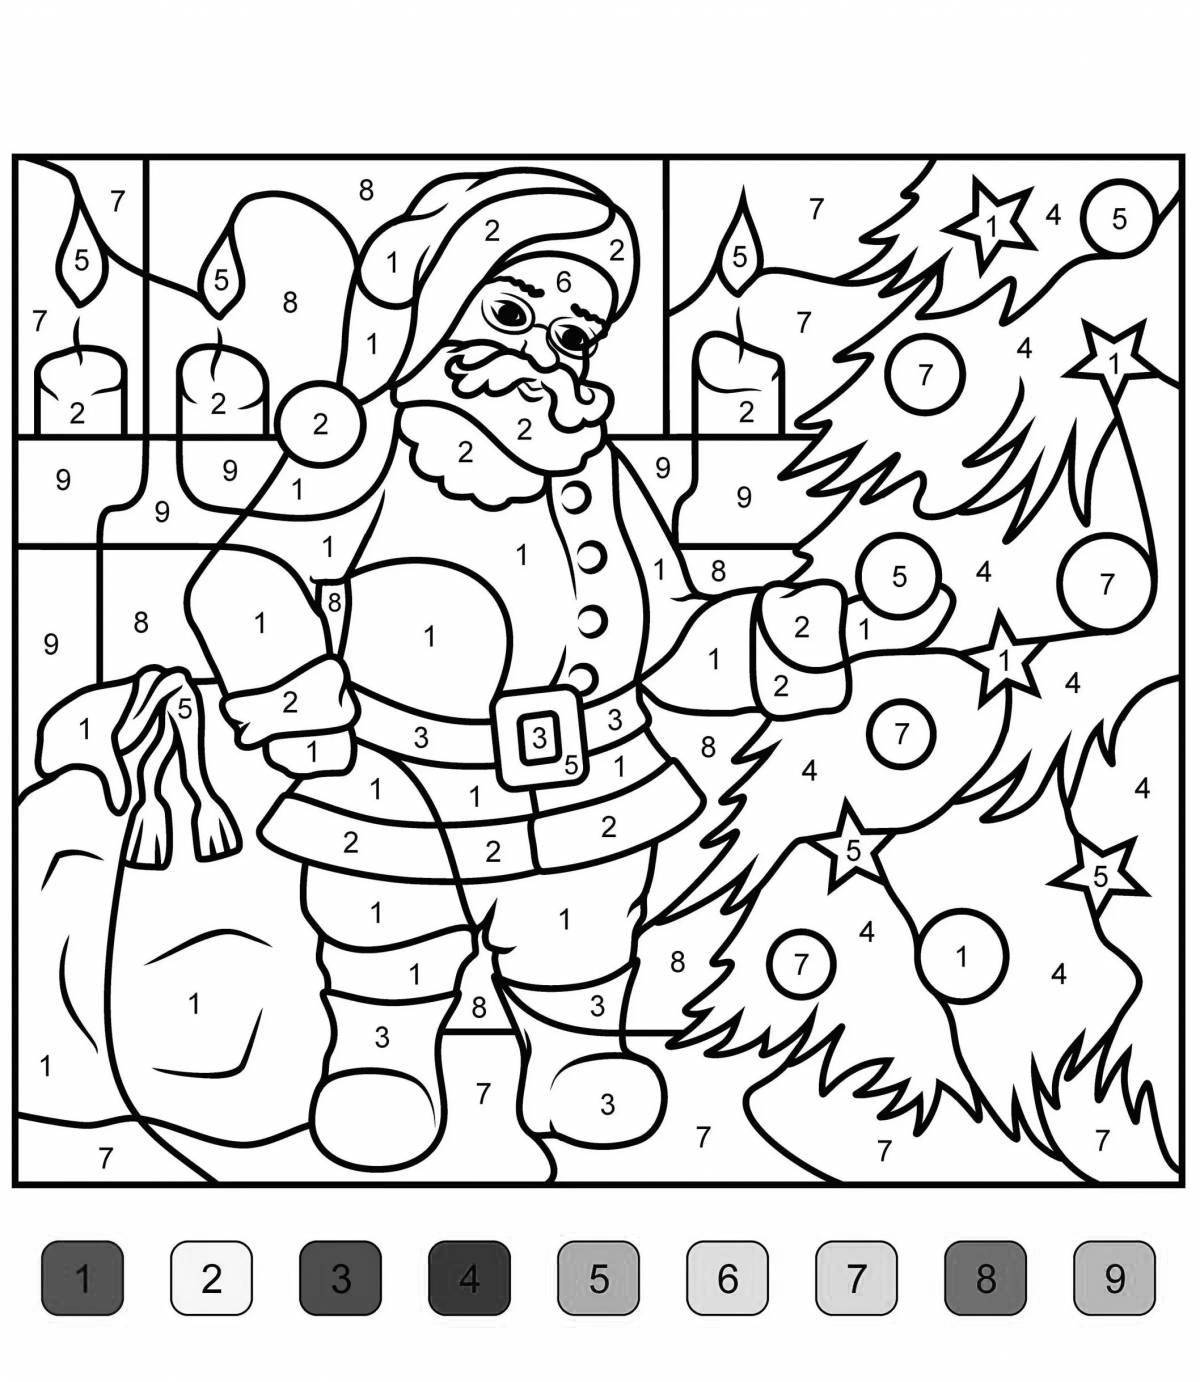 Cute christmas tree coloring by numbers